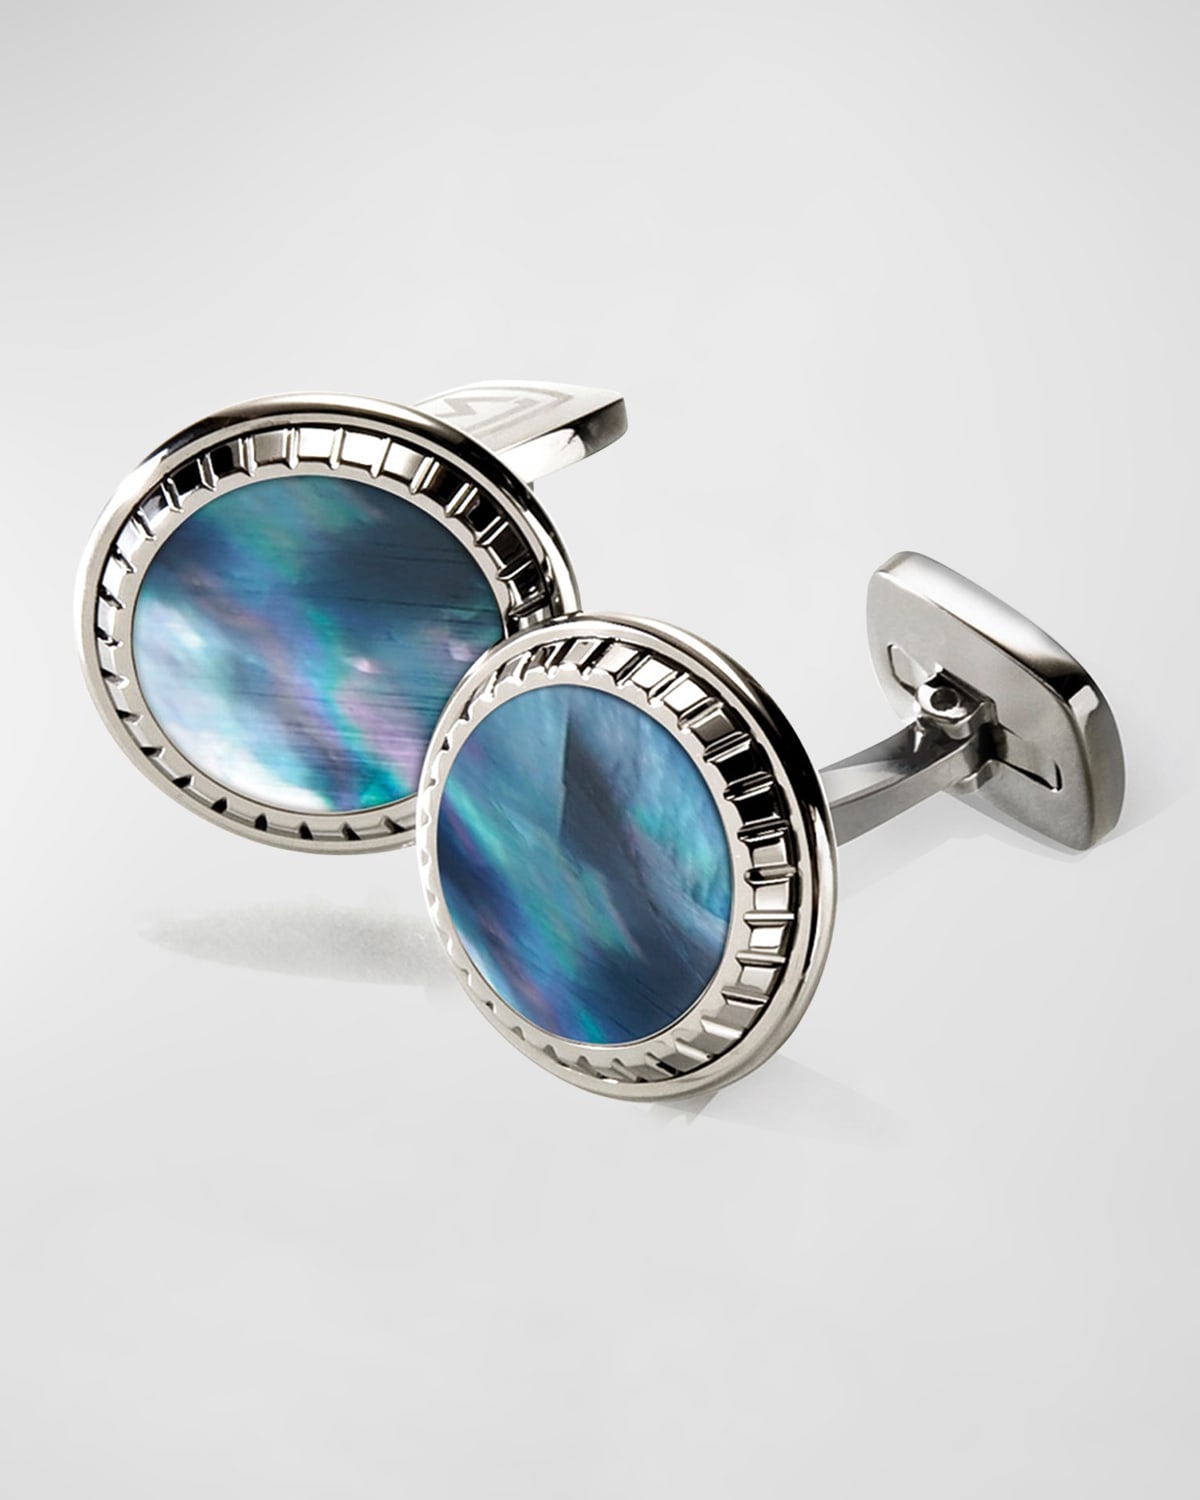 M Clip Men's Gray Mother-Of-Pearl Round Cufflinks